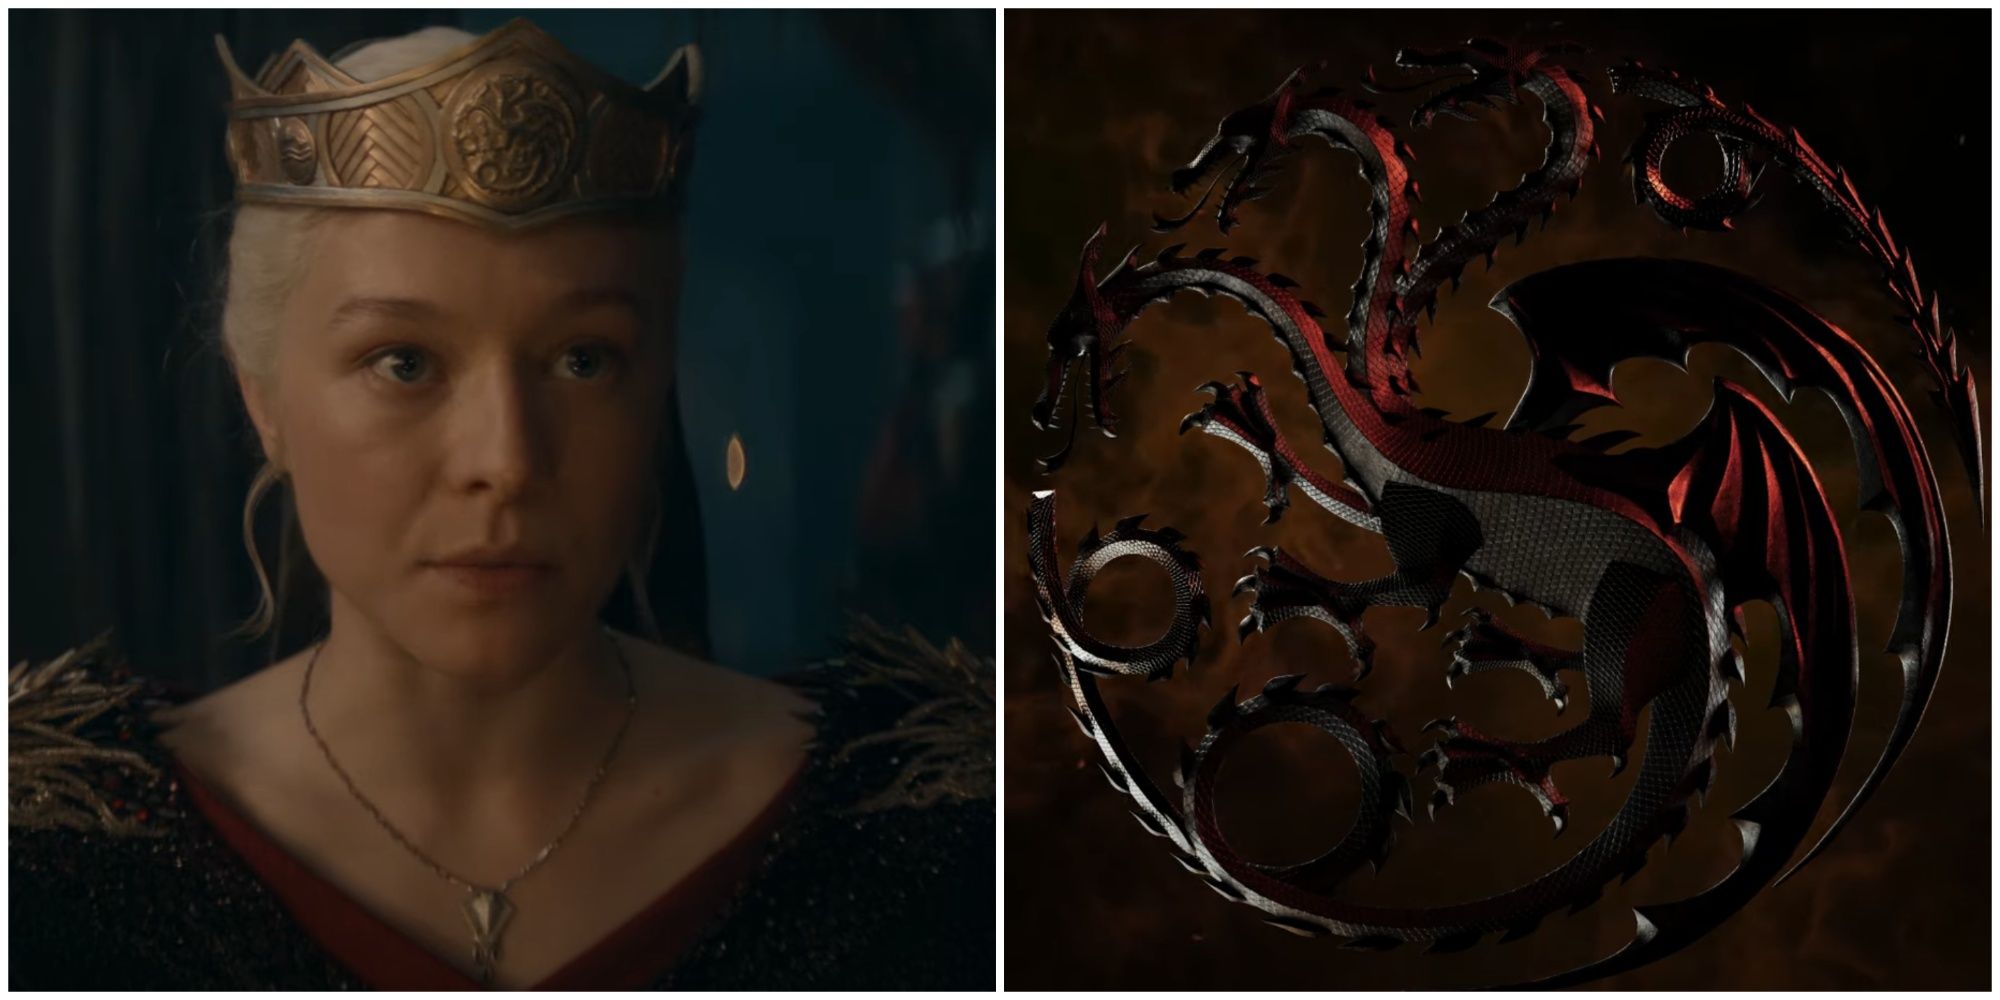 Split image of Queen Rhaenyra Targaryen and the three-headed red dragon from House of the Dragon season 2 Black trailer